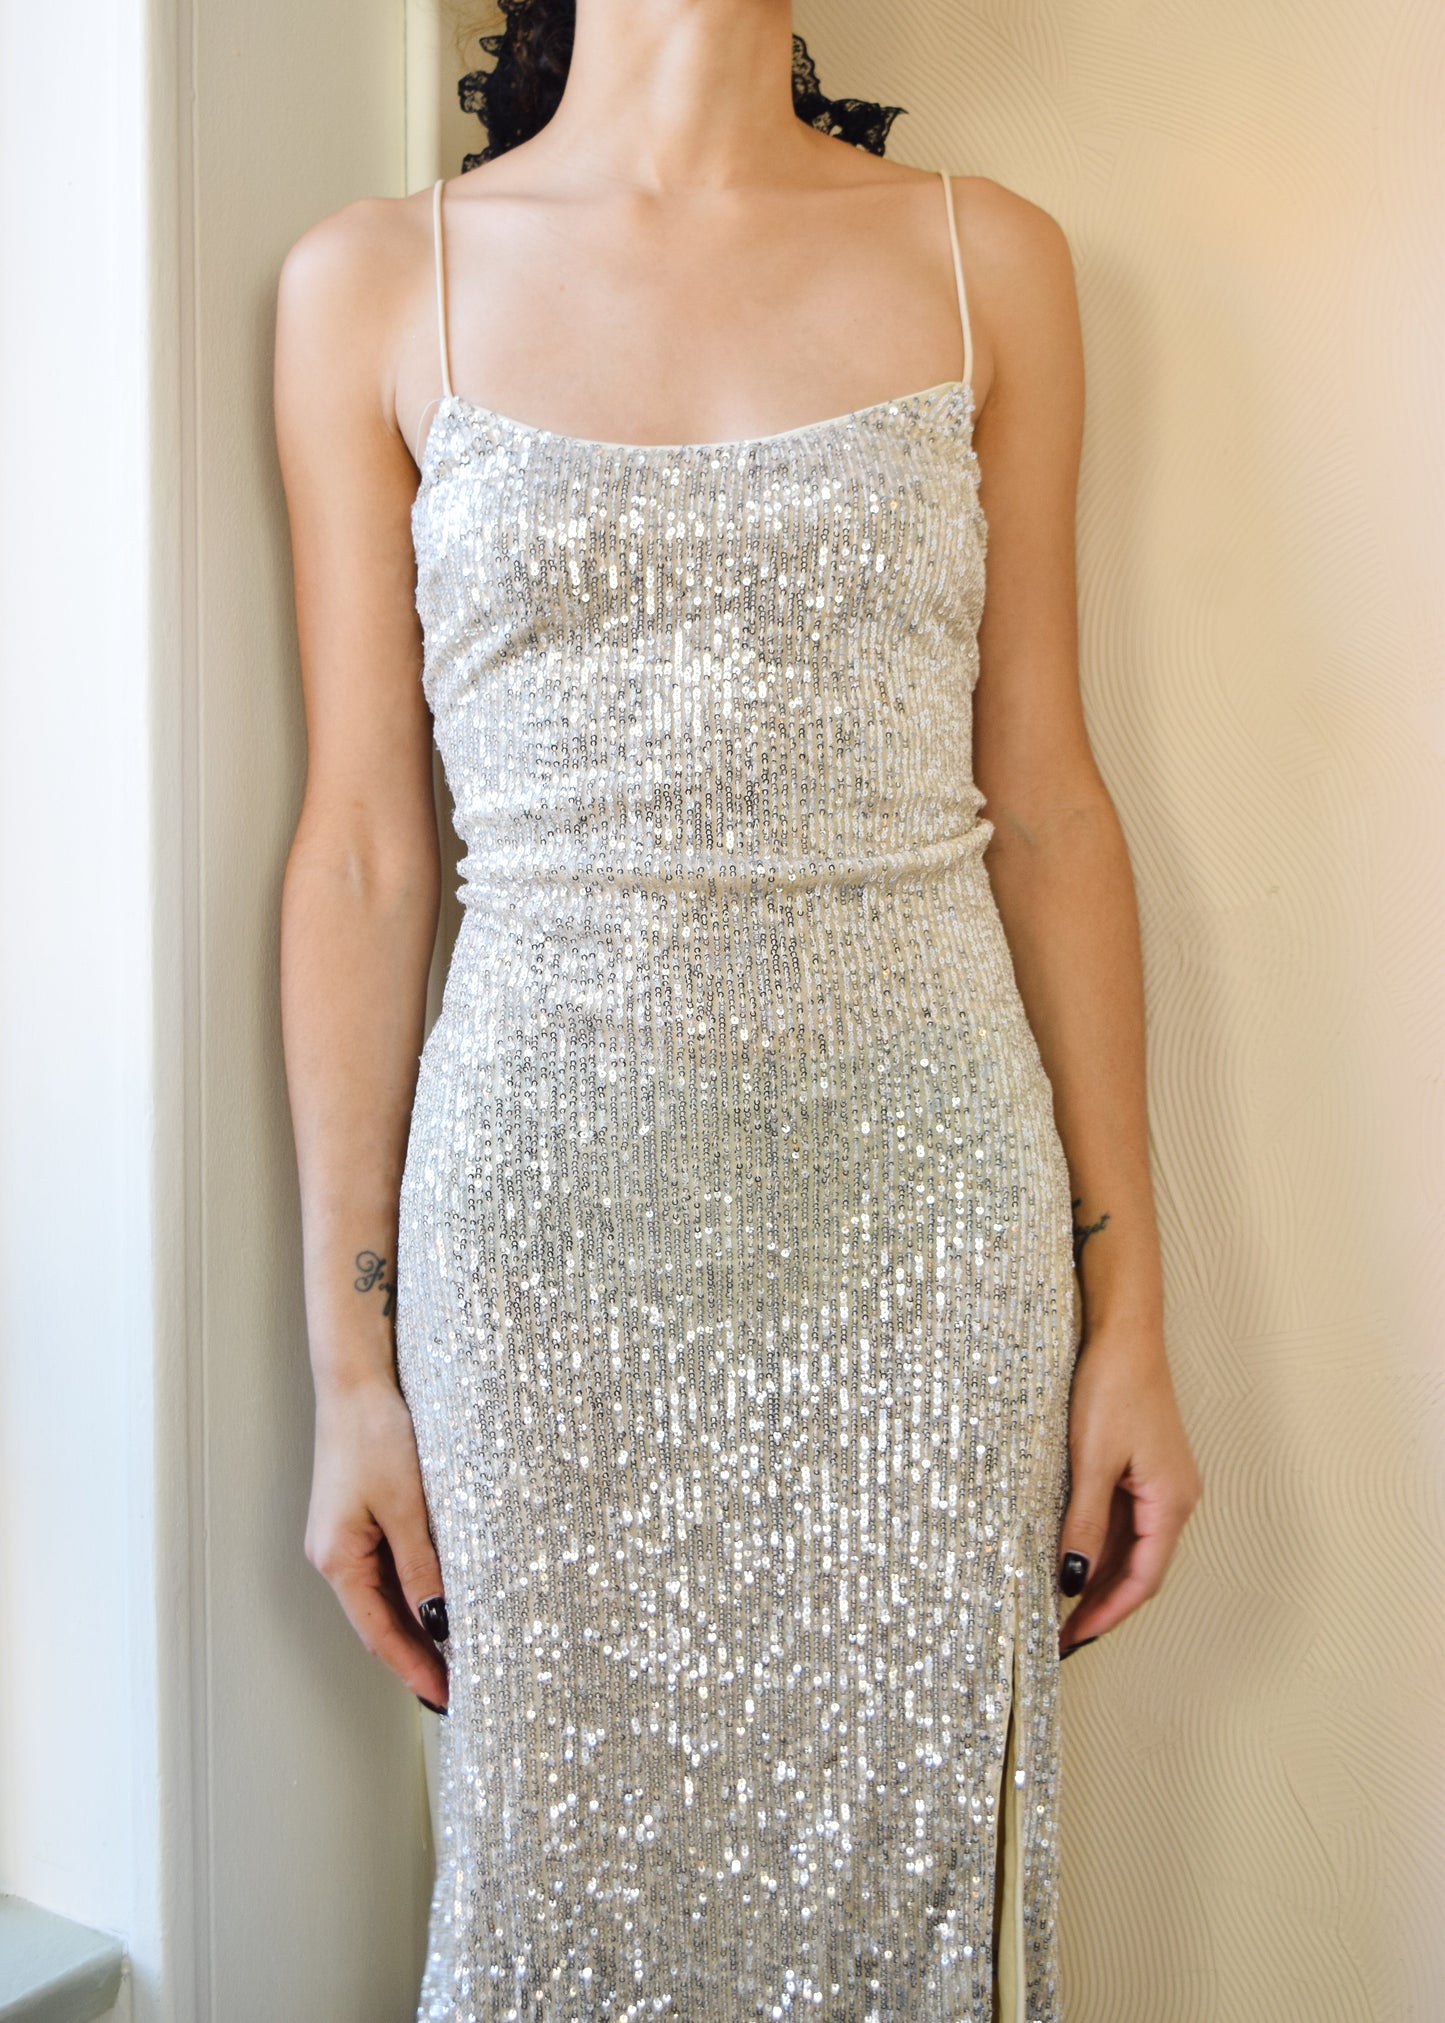 Mod Champagne Sparkly Dress (S)